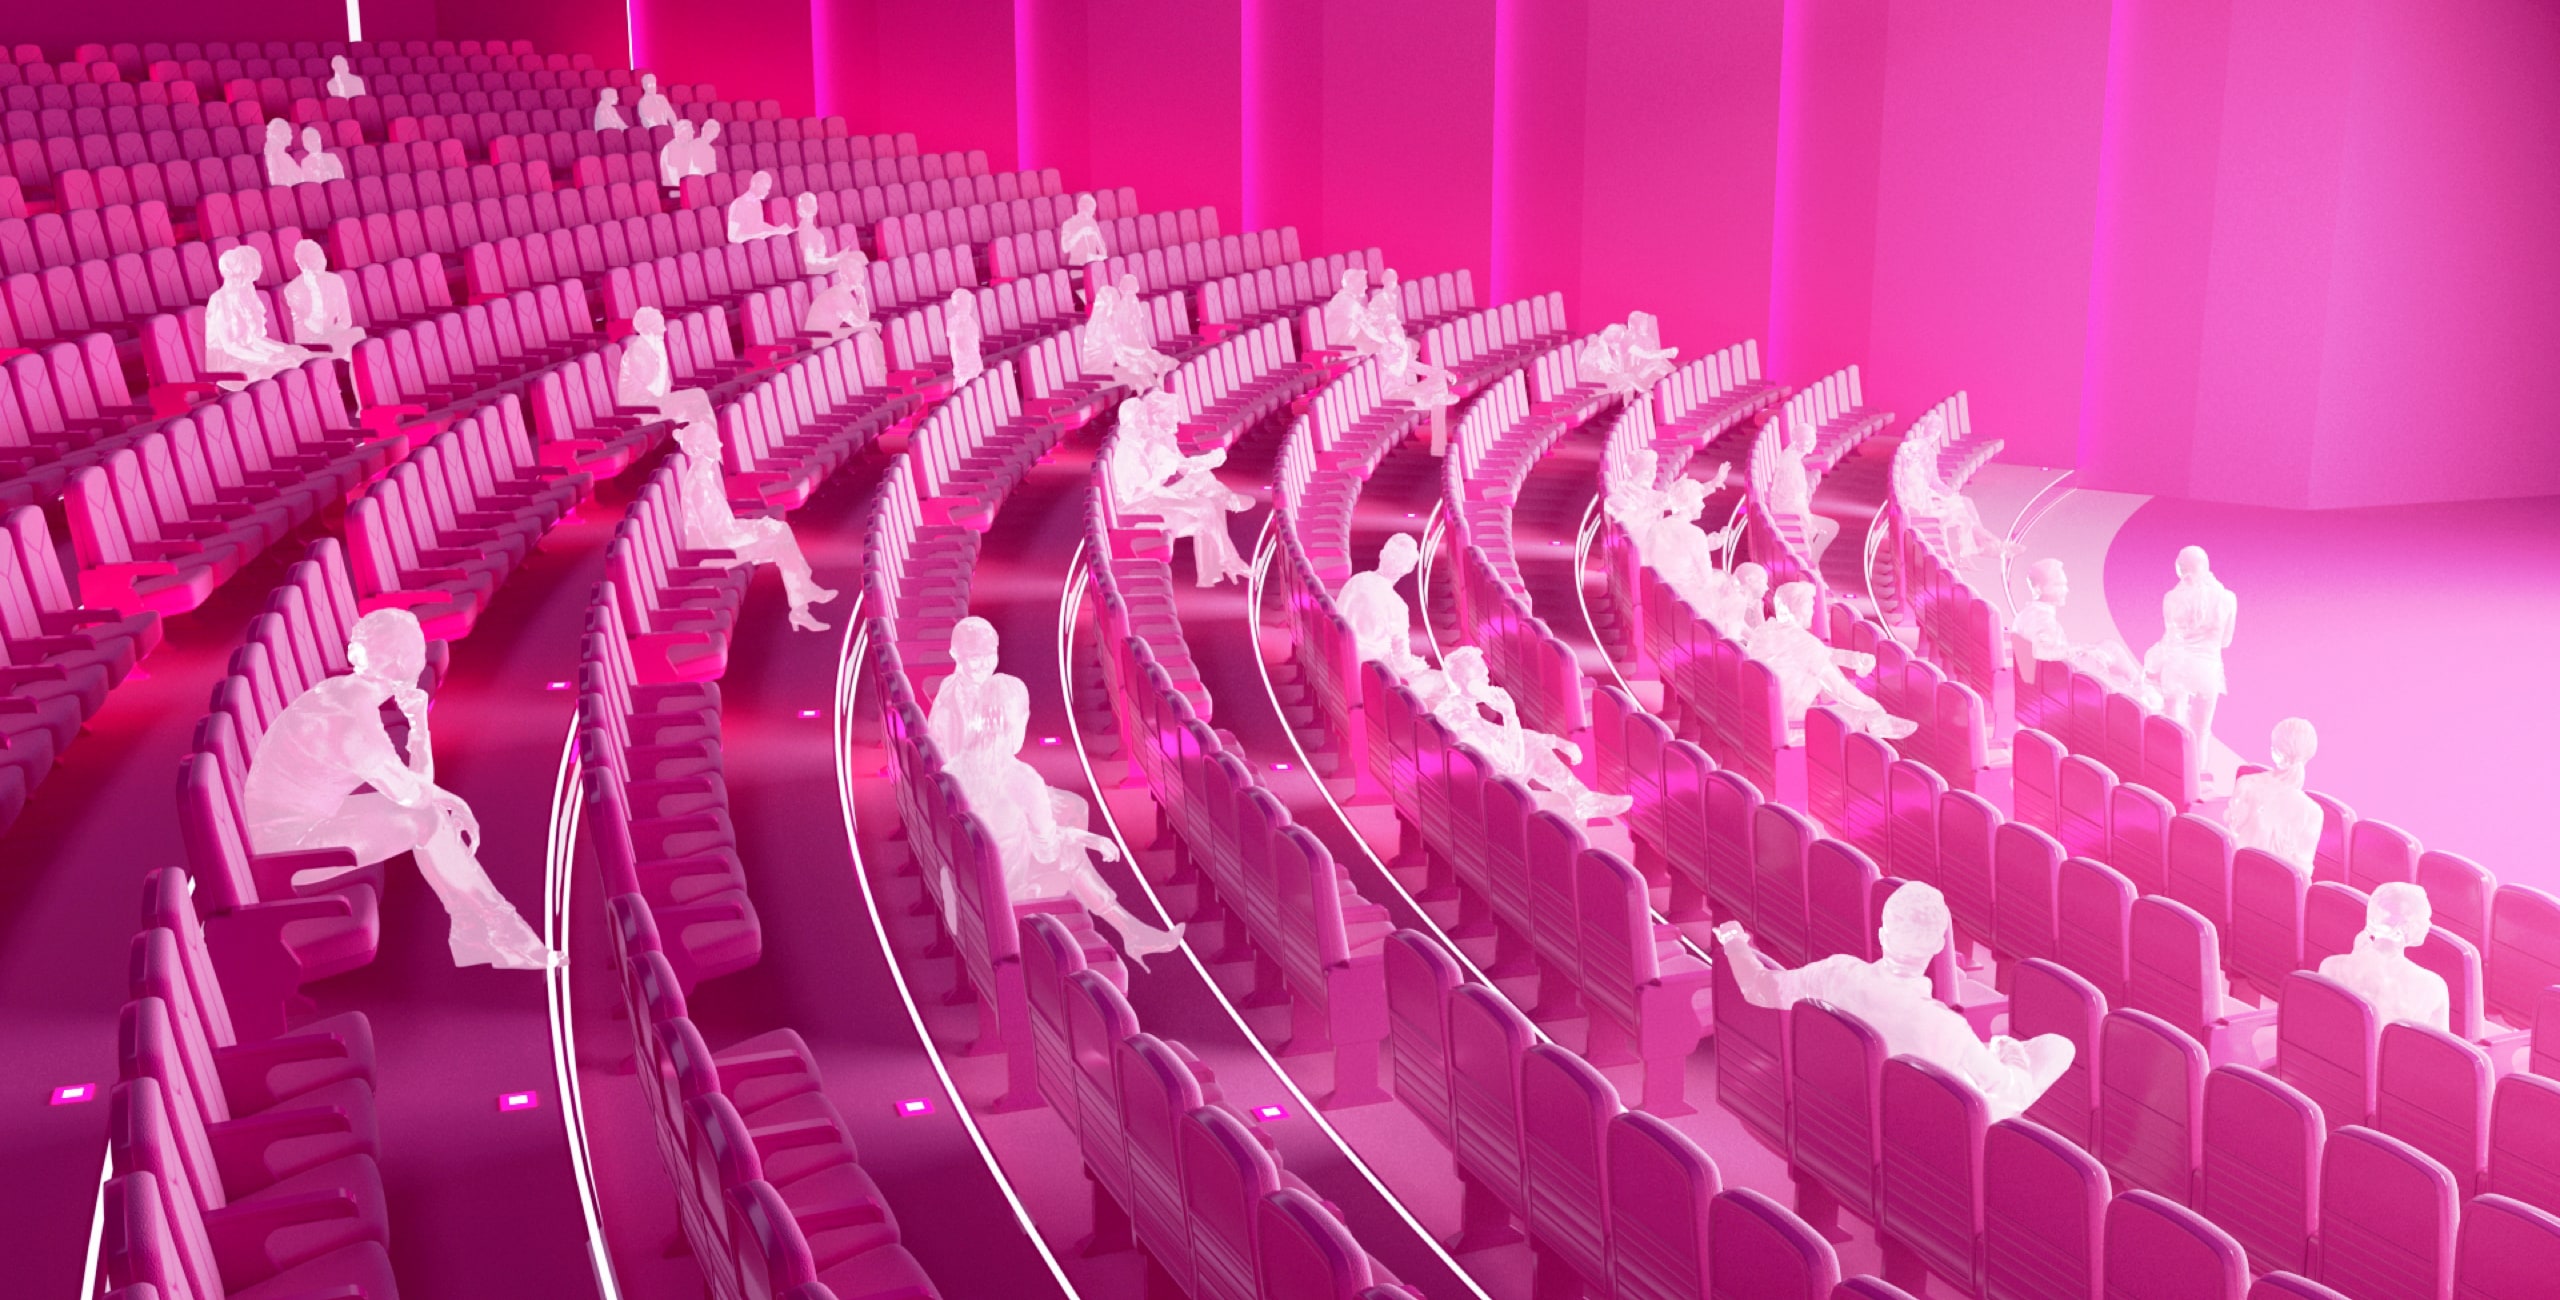 A group of people sitting in a pink auditorium.